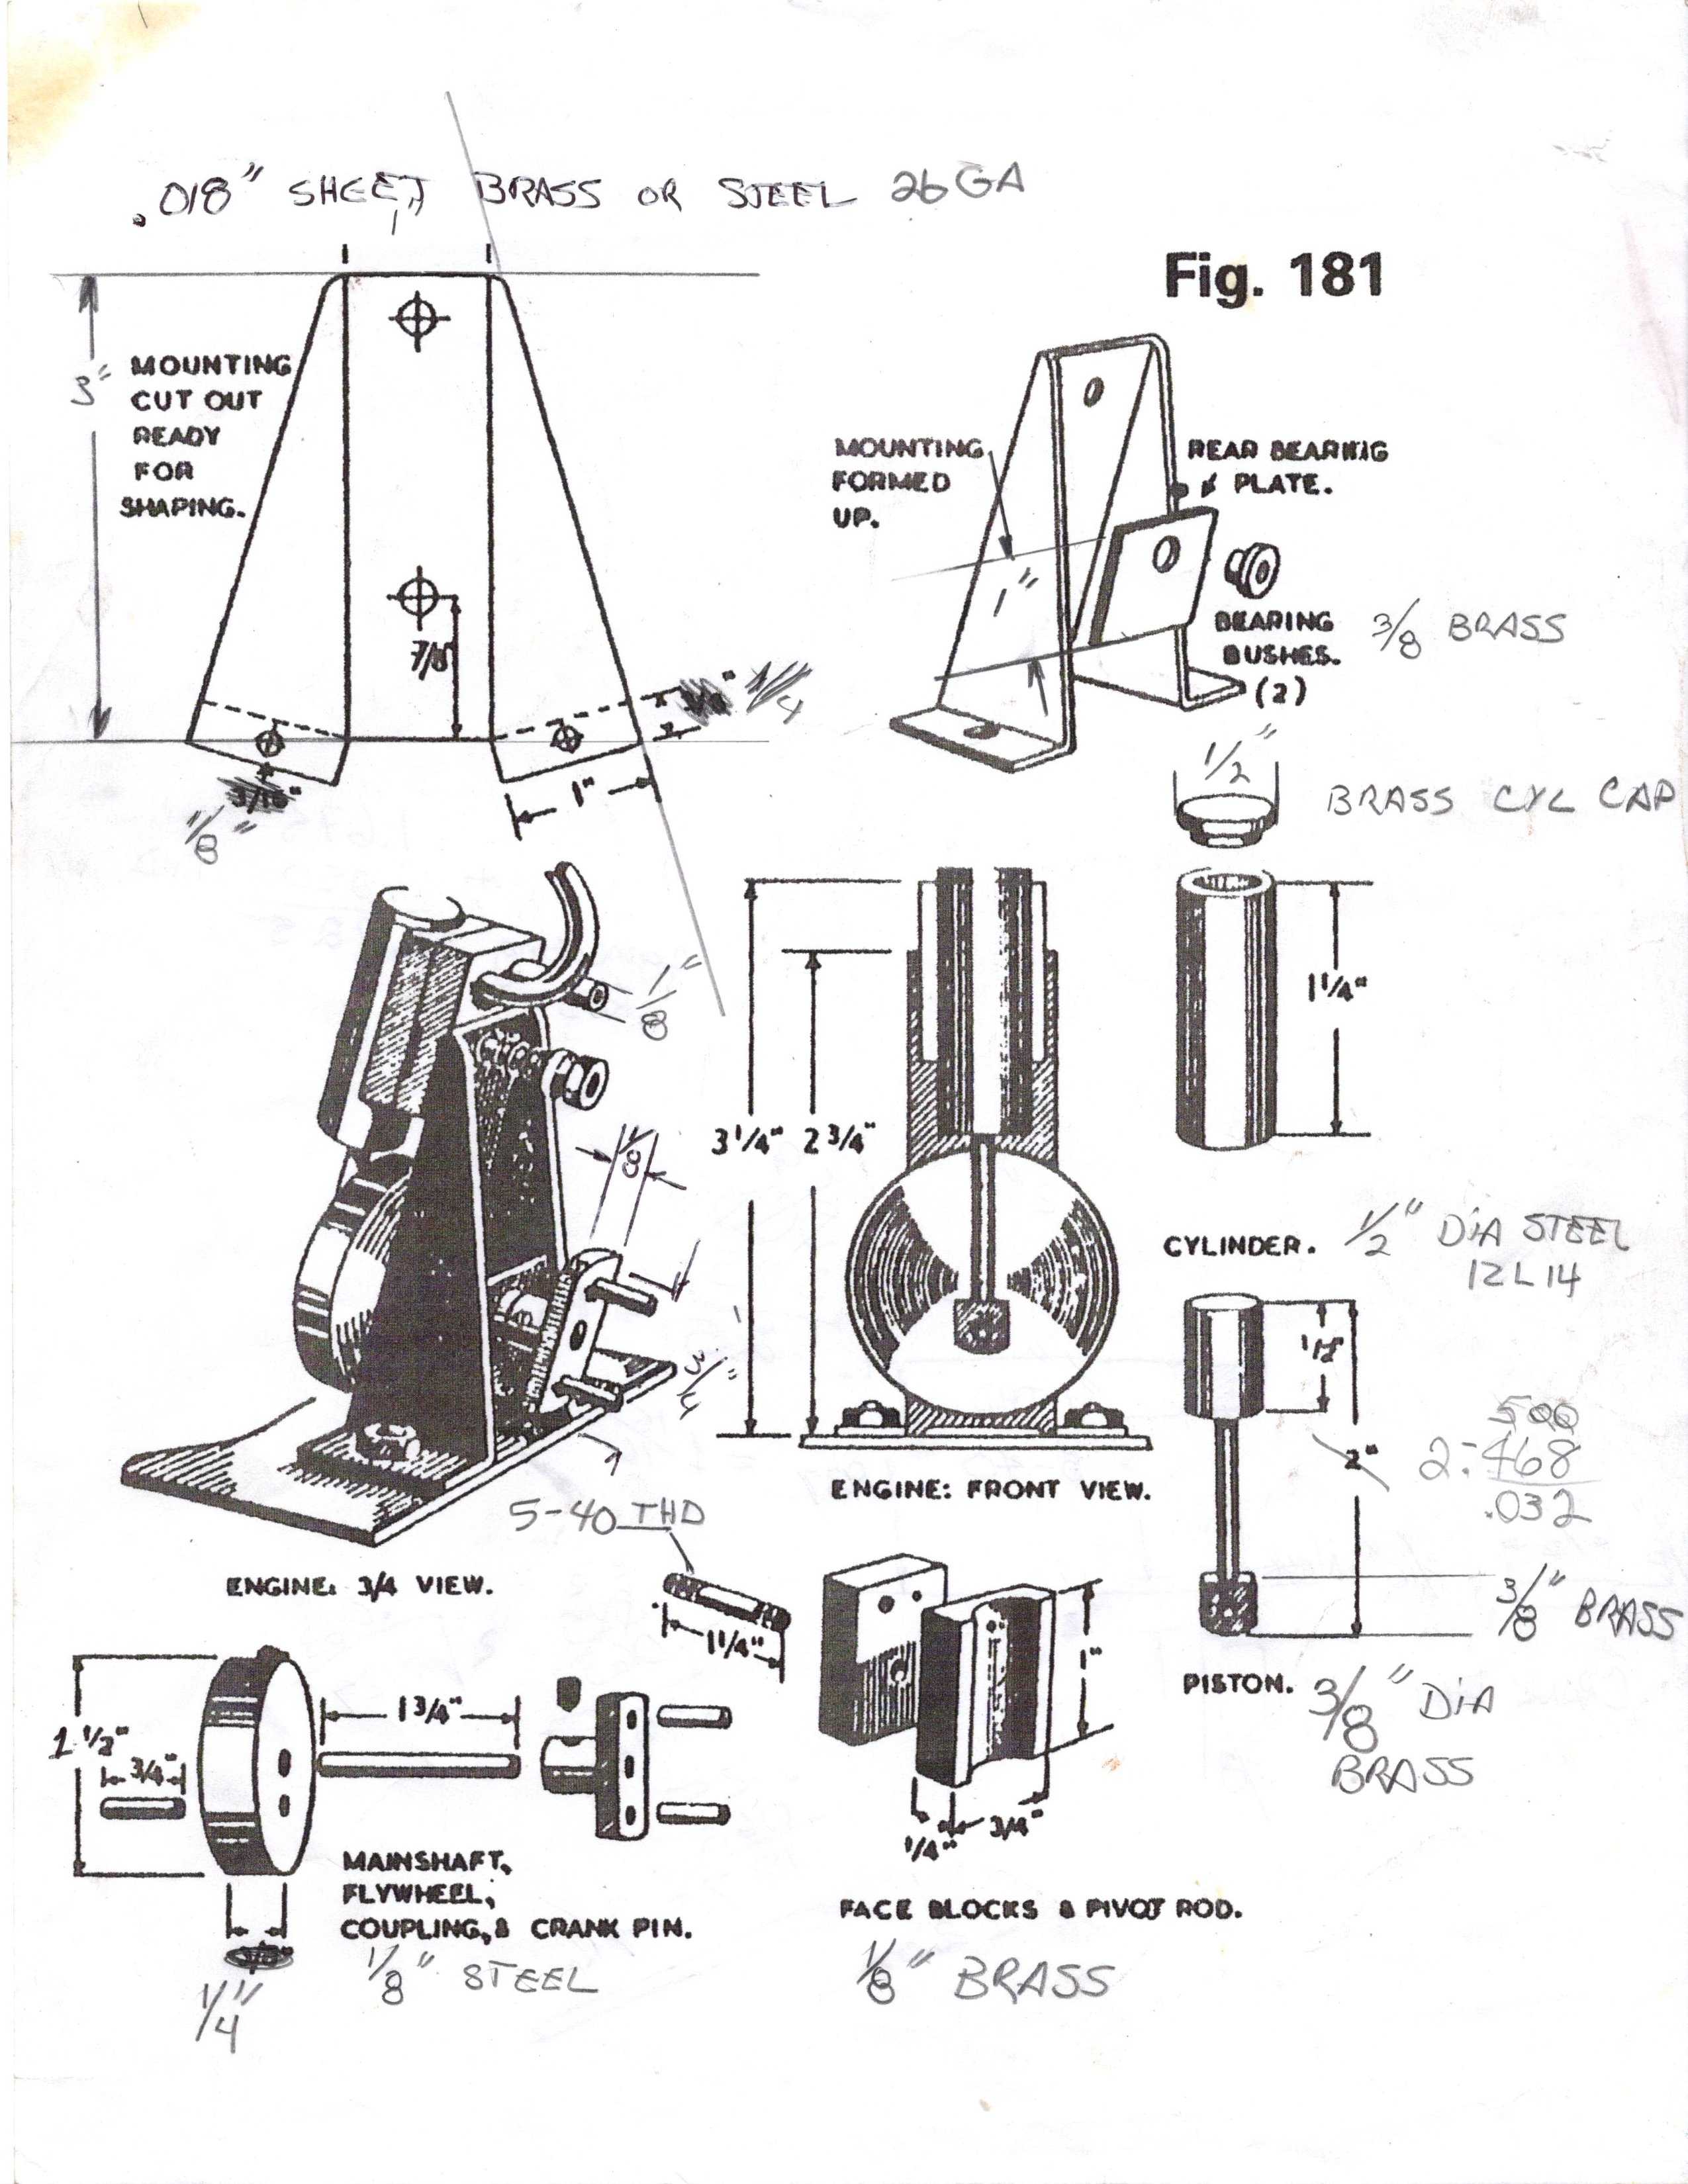 Small diagram of an oscillating steam engine from Vic Smeed's book "Model Boating"